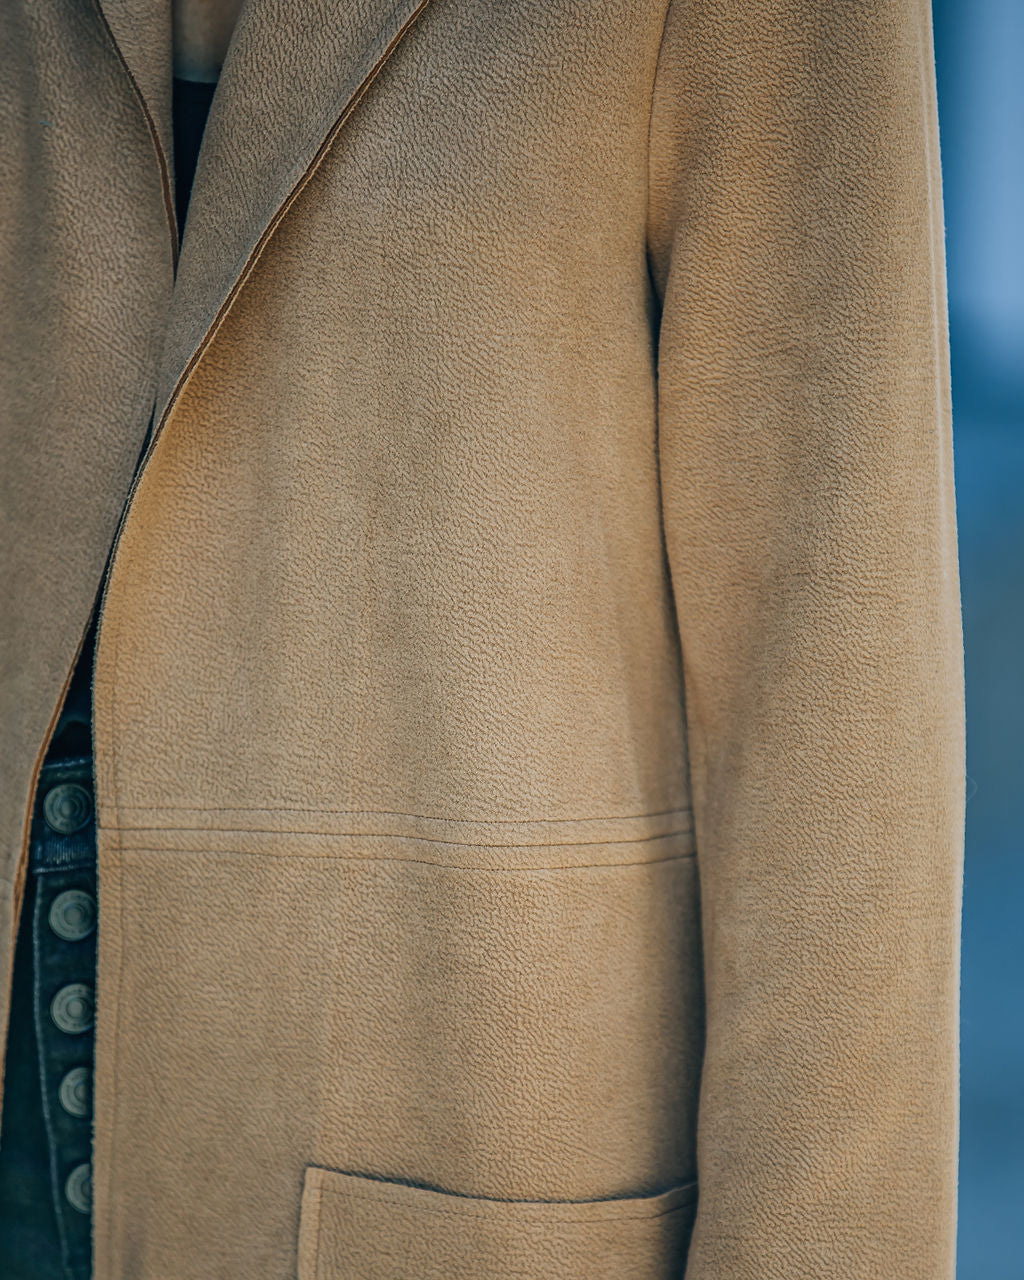 Vancouver Pocketed Coat - Tan